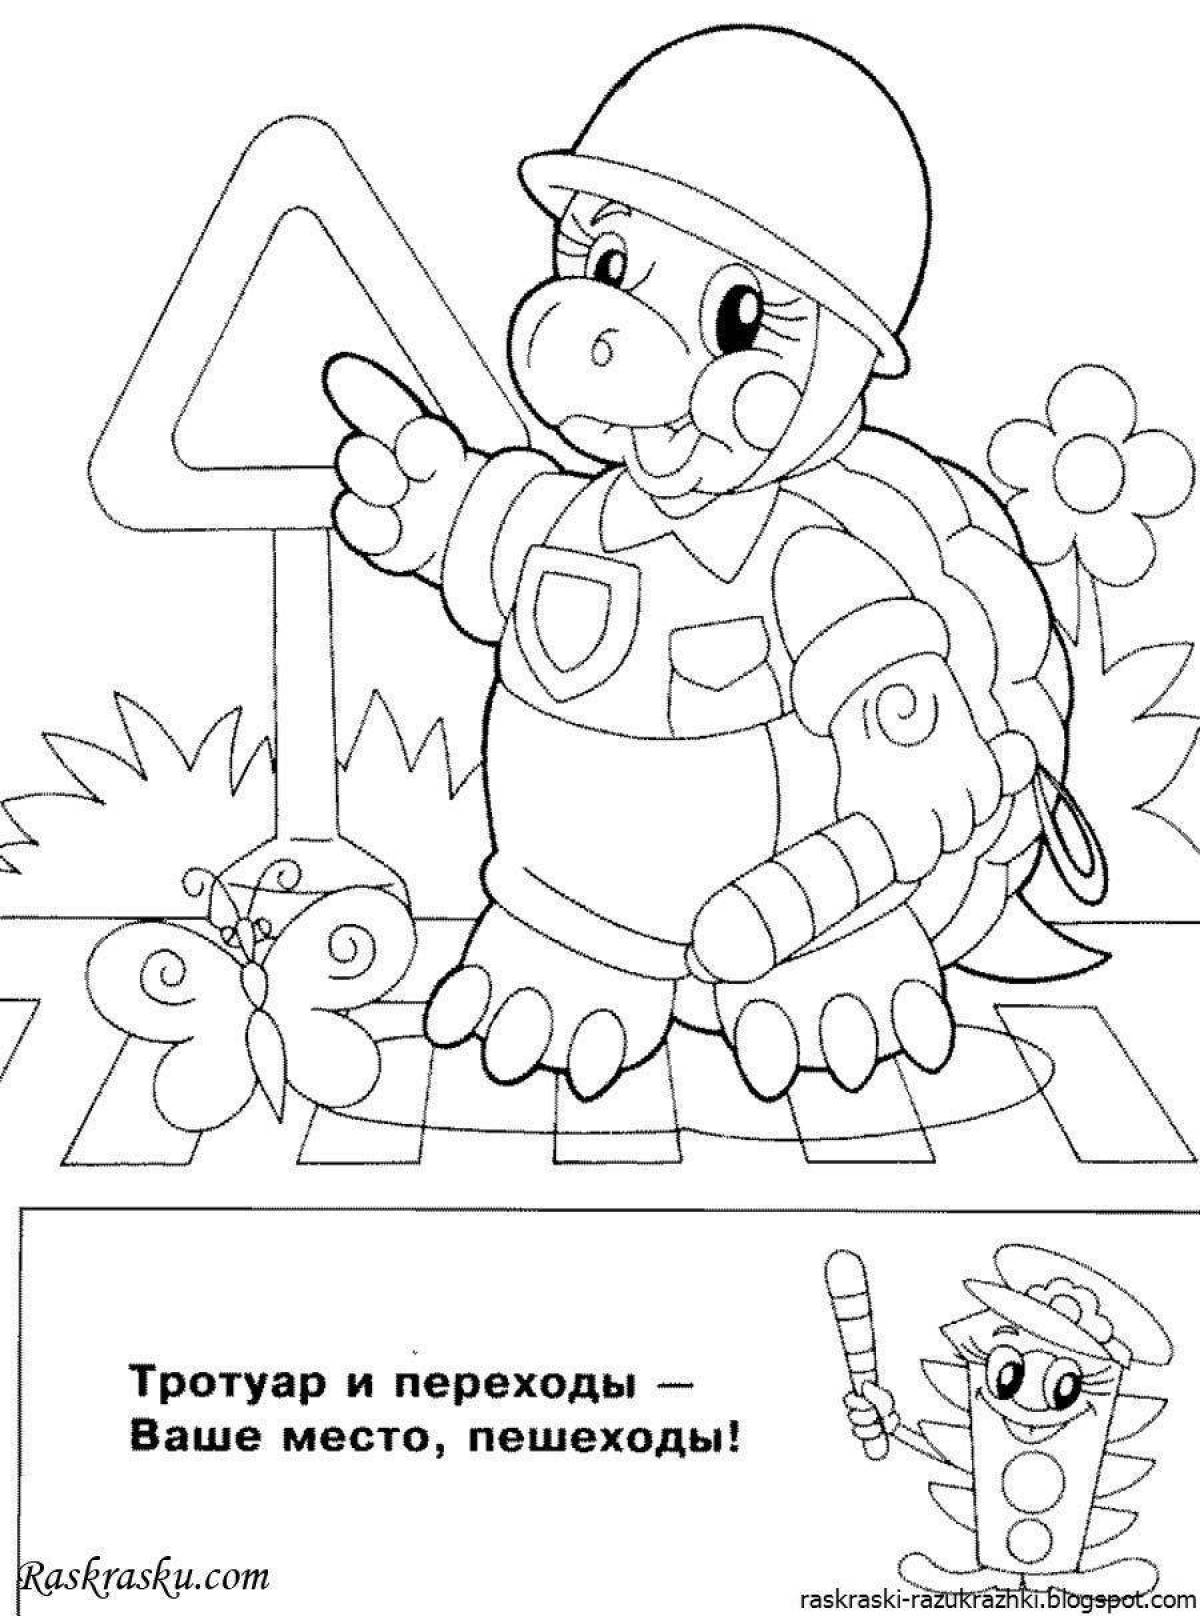 Interactive traffic rules coloring book for schoolchildren